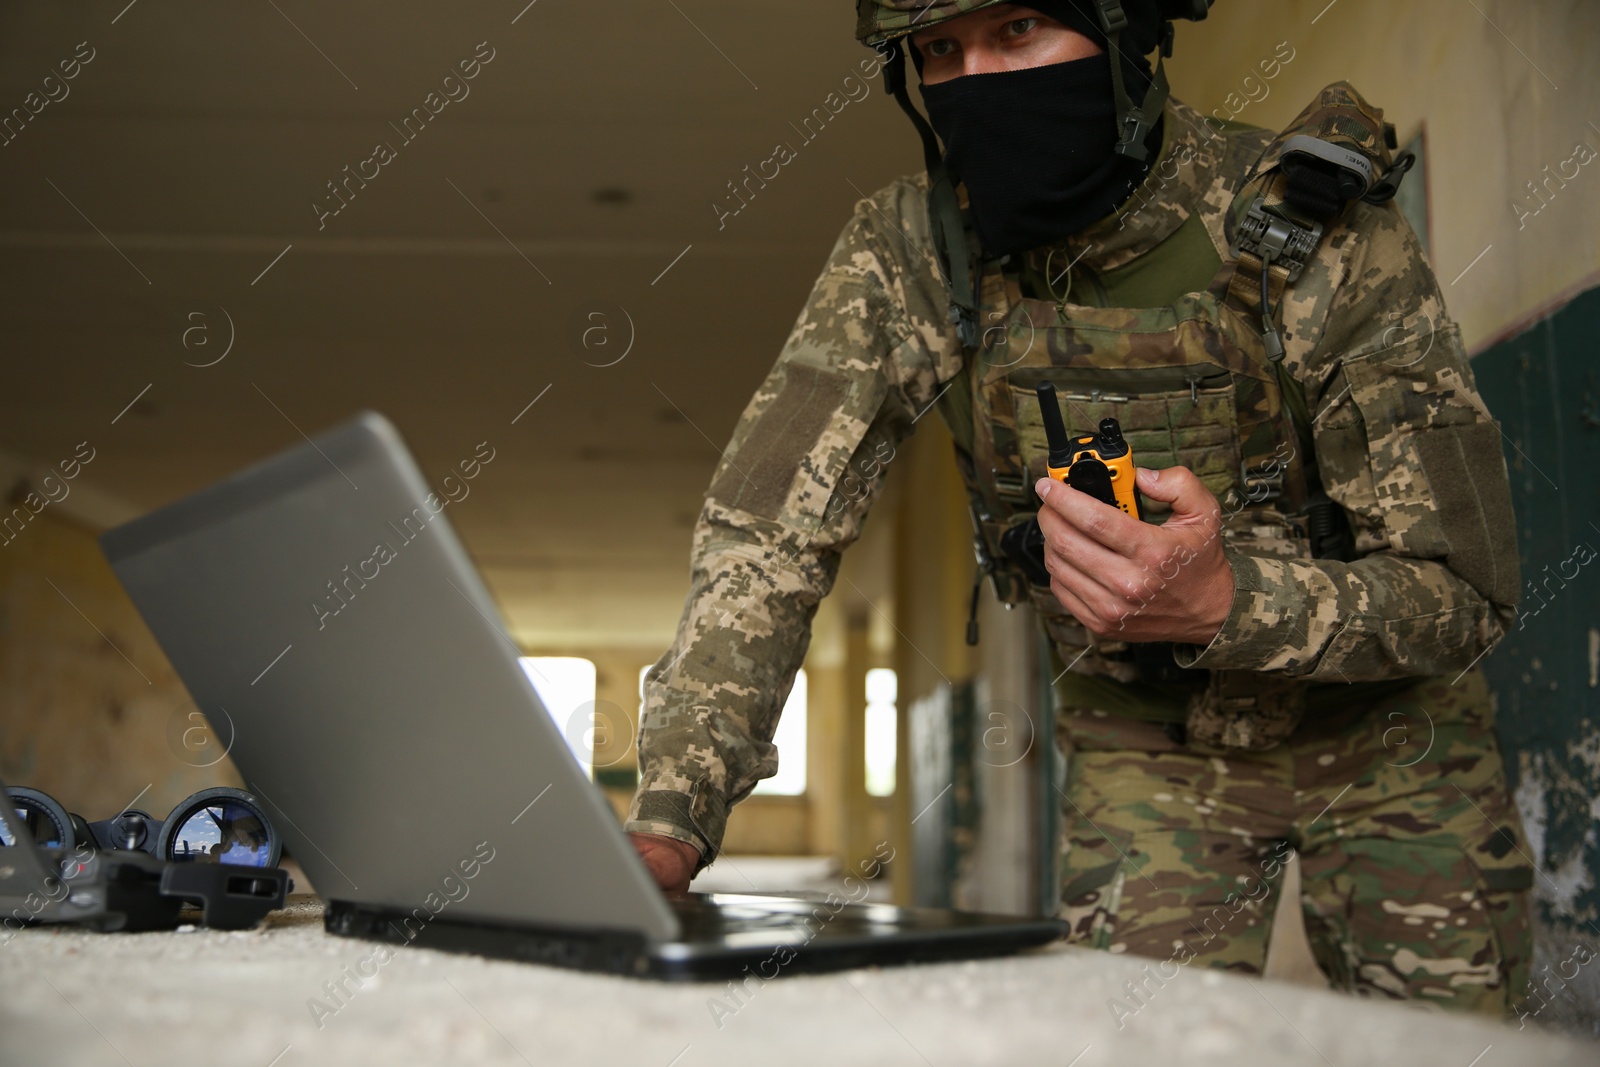 Photo of Military mission. Soldier in uniform with radio transmitter using laptop at table inside abandoned building